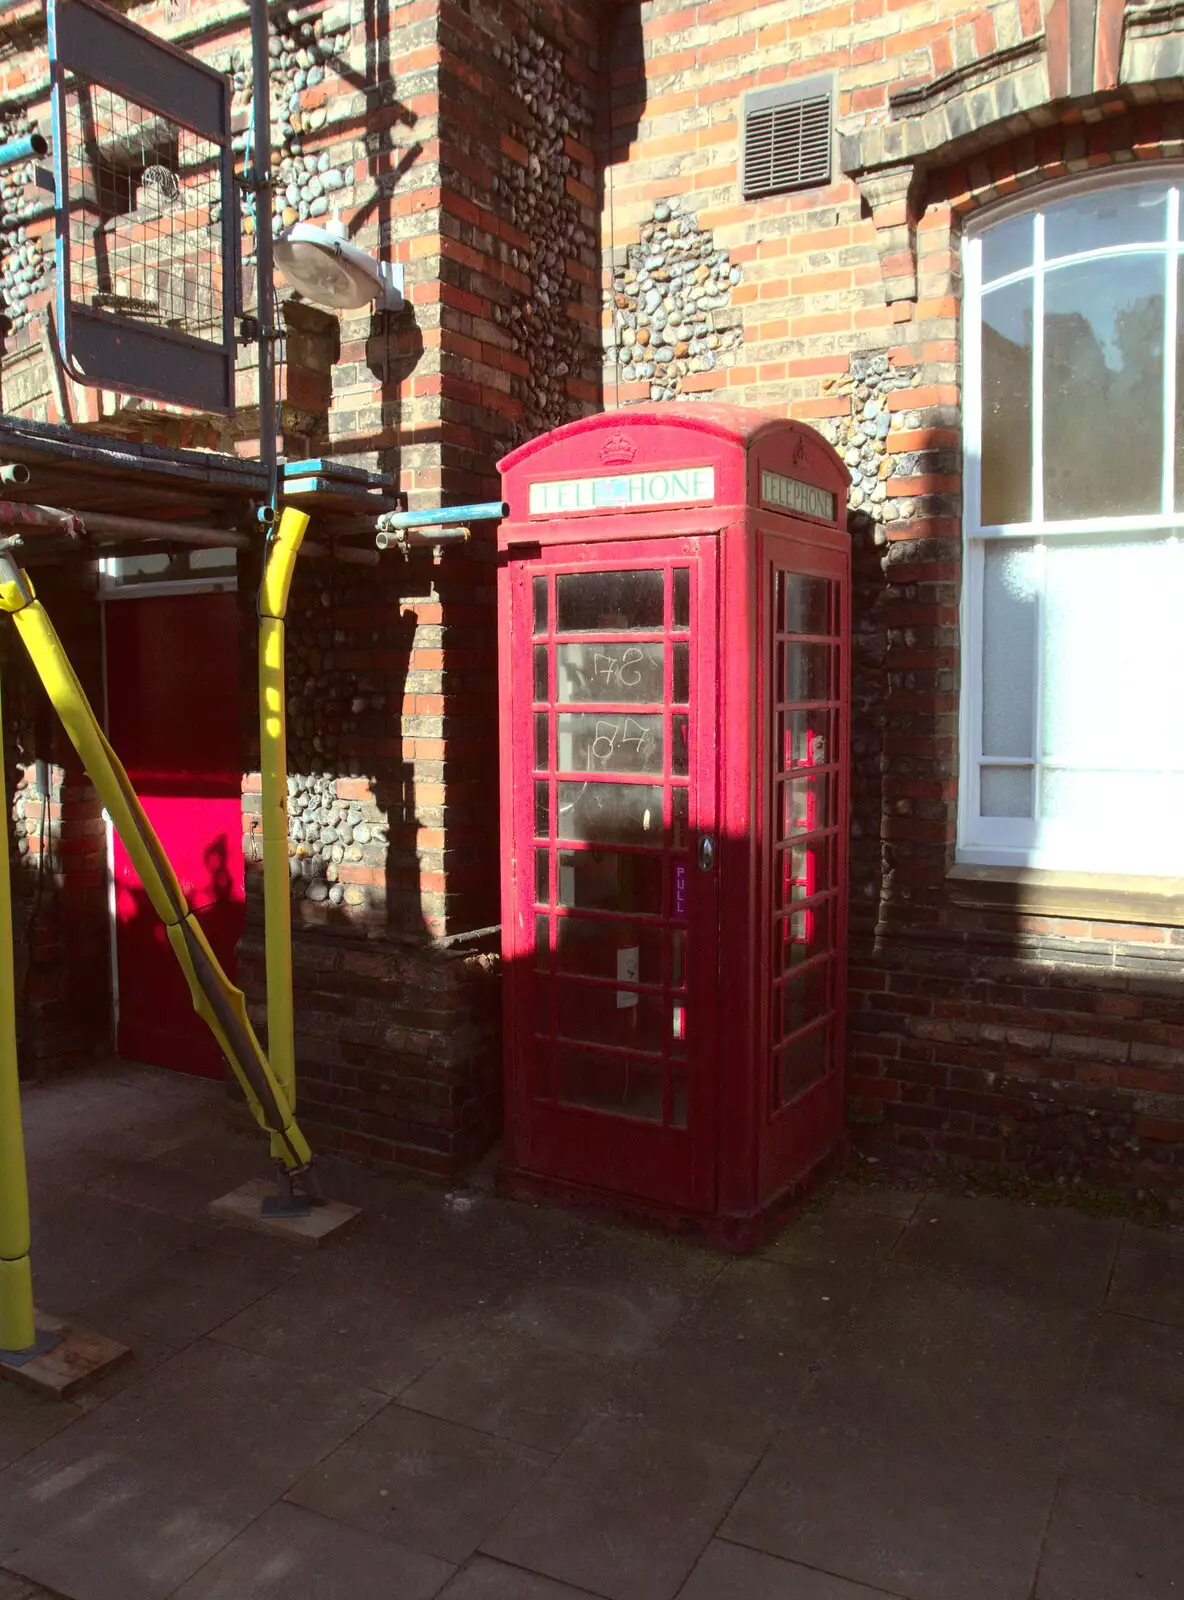 The K6 phonebox by the Town Hall is looking jaded, from A Walk Around Eye, and the Return of Red Tent, Suffolk and London - 25th February 2018